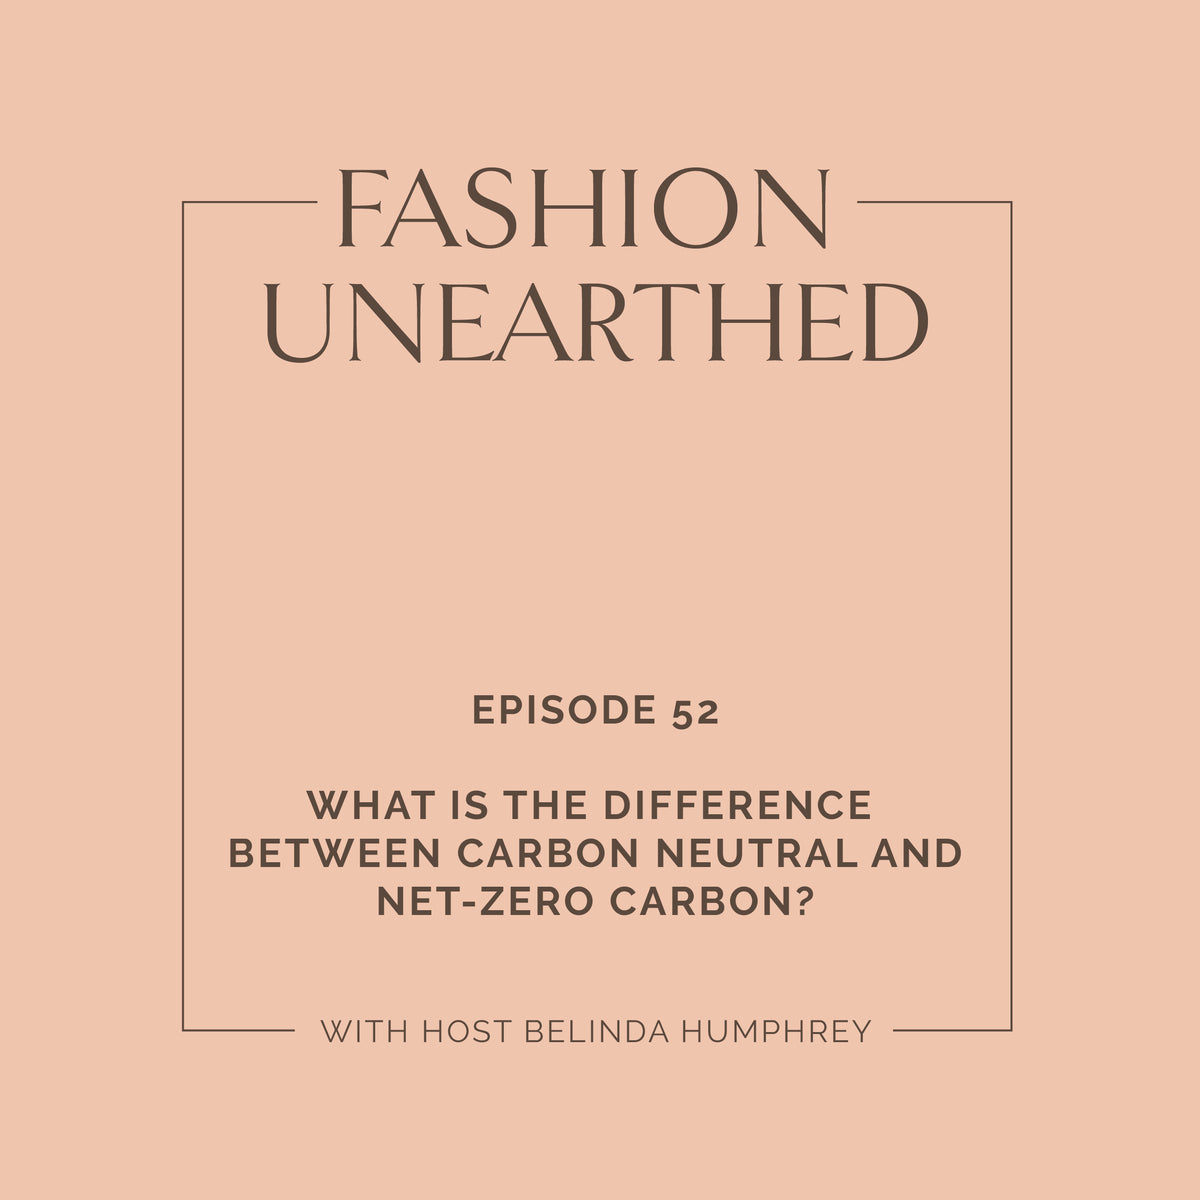 Episode 52: What is the difference between Carbon Neutral and Net Zero Carbon?